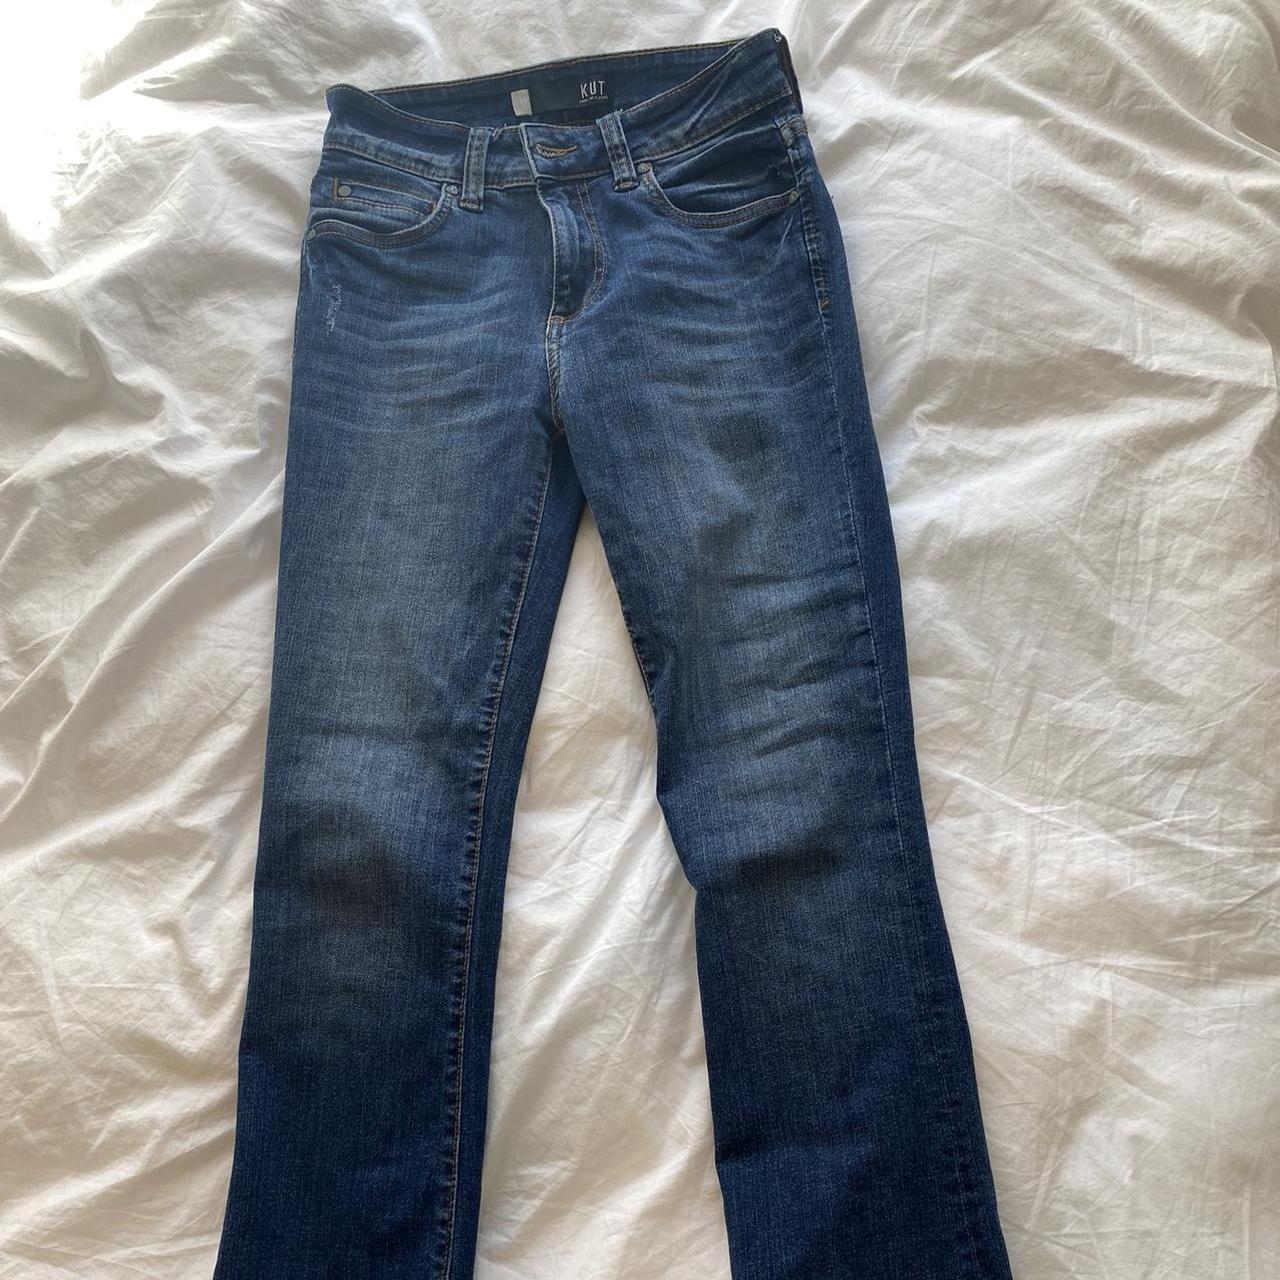 Kut from the Kloth Women's Jeans (3)